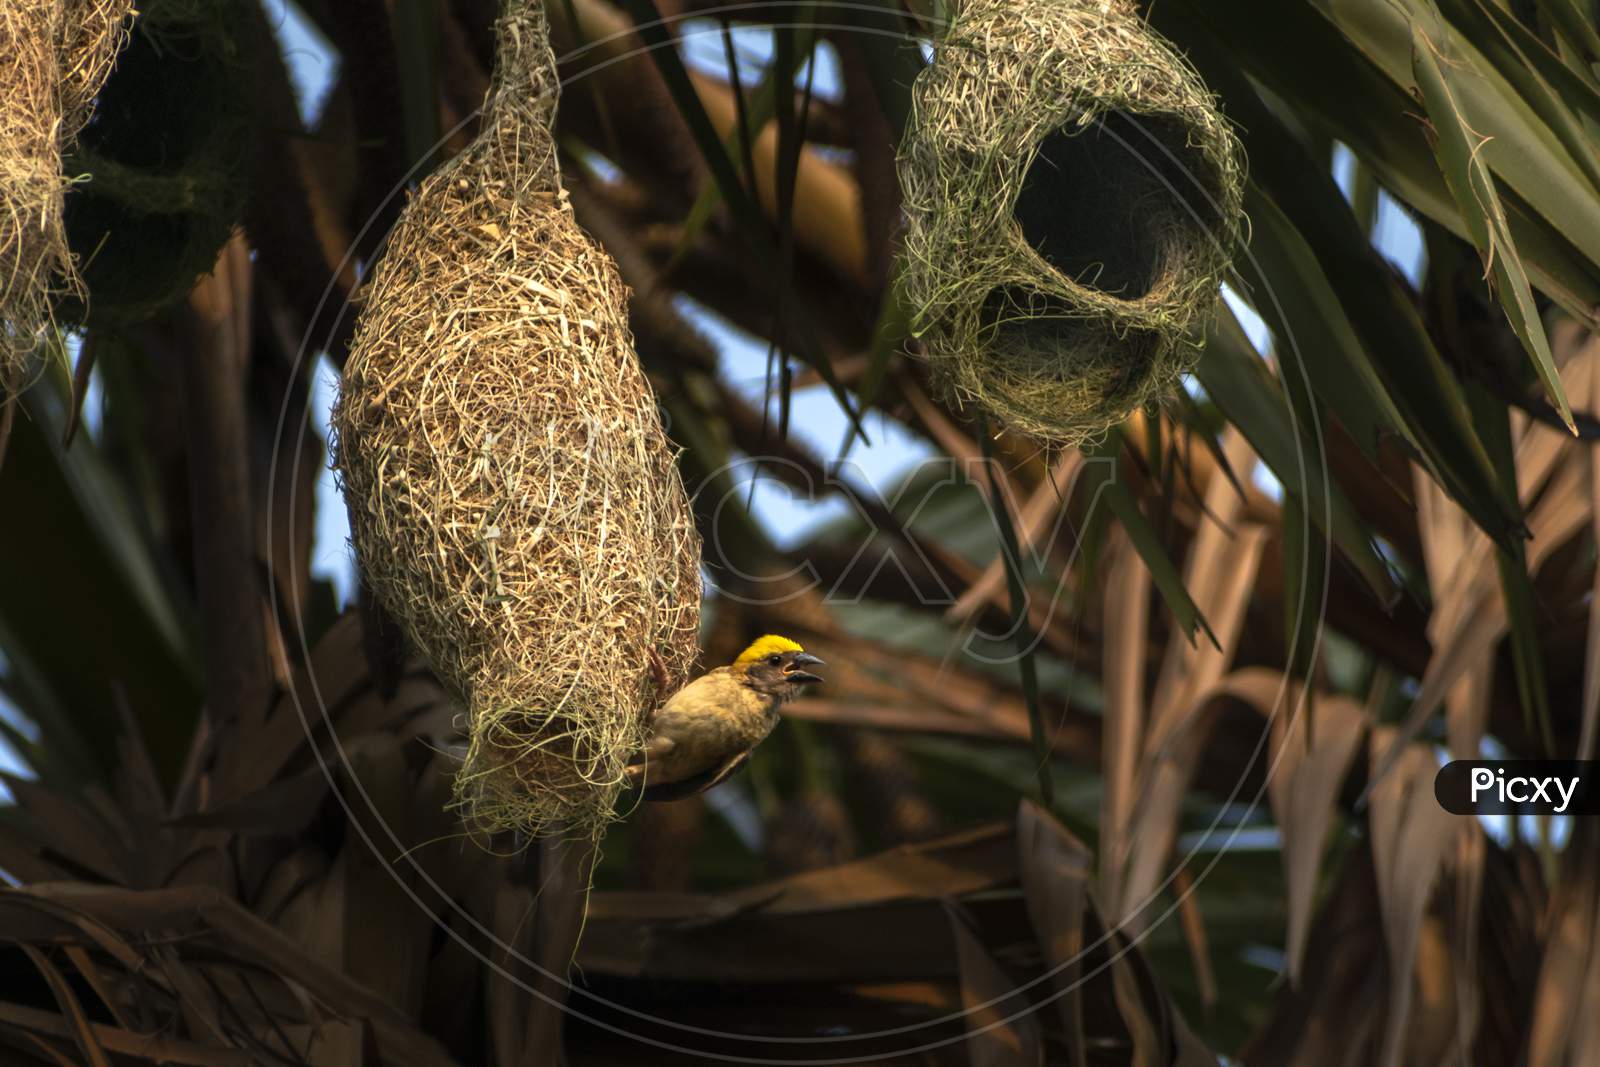 Nests of a baya weaver colony suspended from a palm tree, India